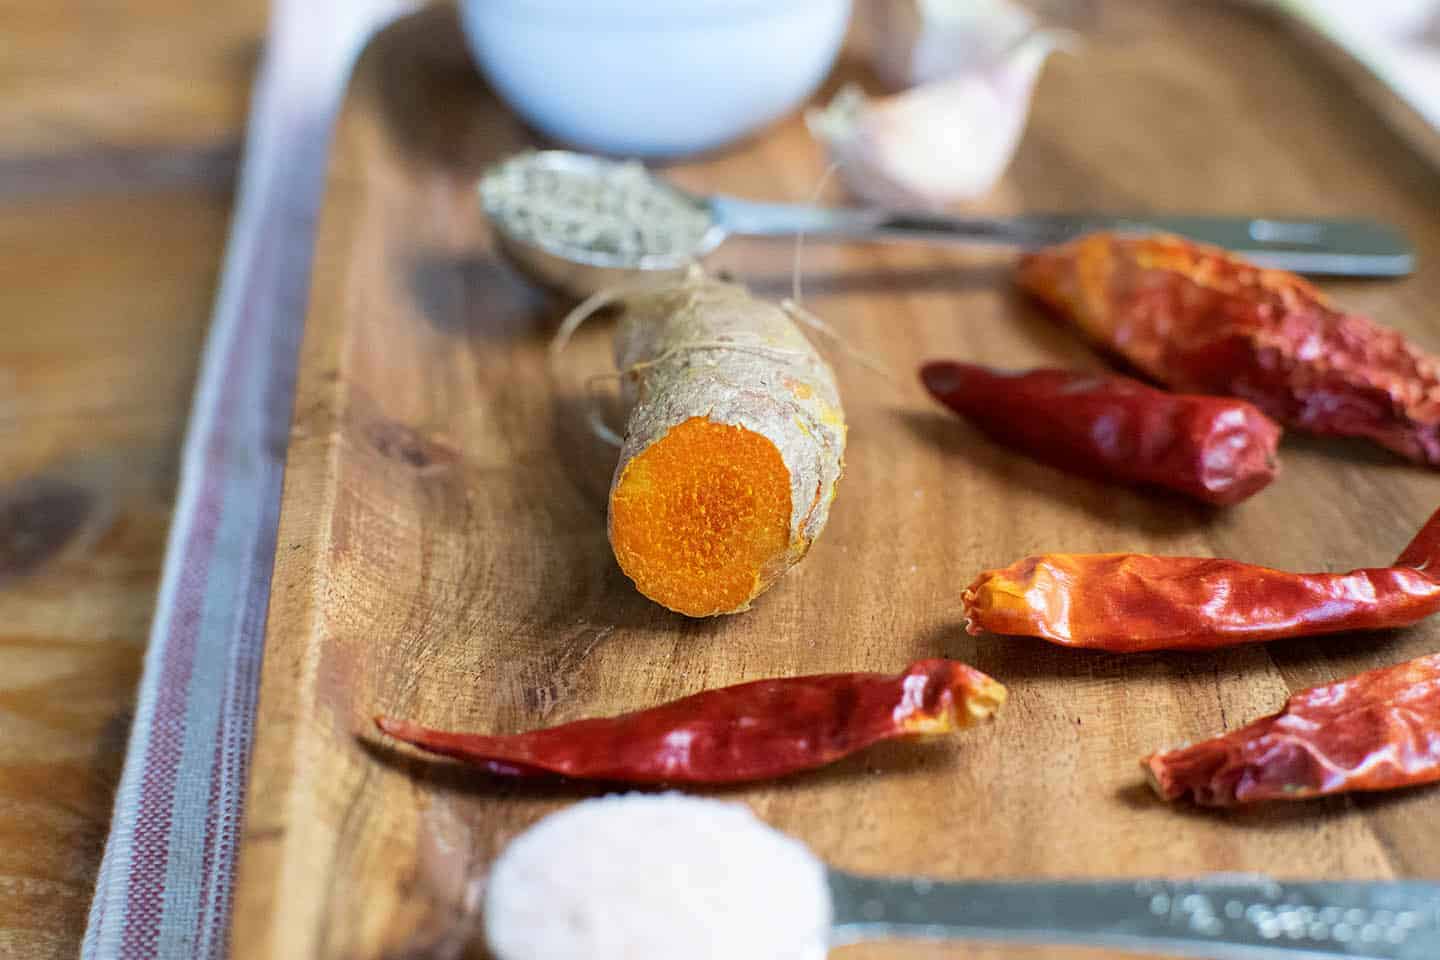 A picture of fresh turmeric with dried red chillies and other ingredients around it.